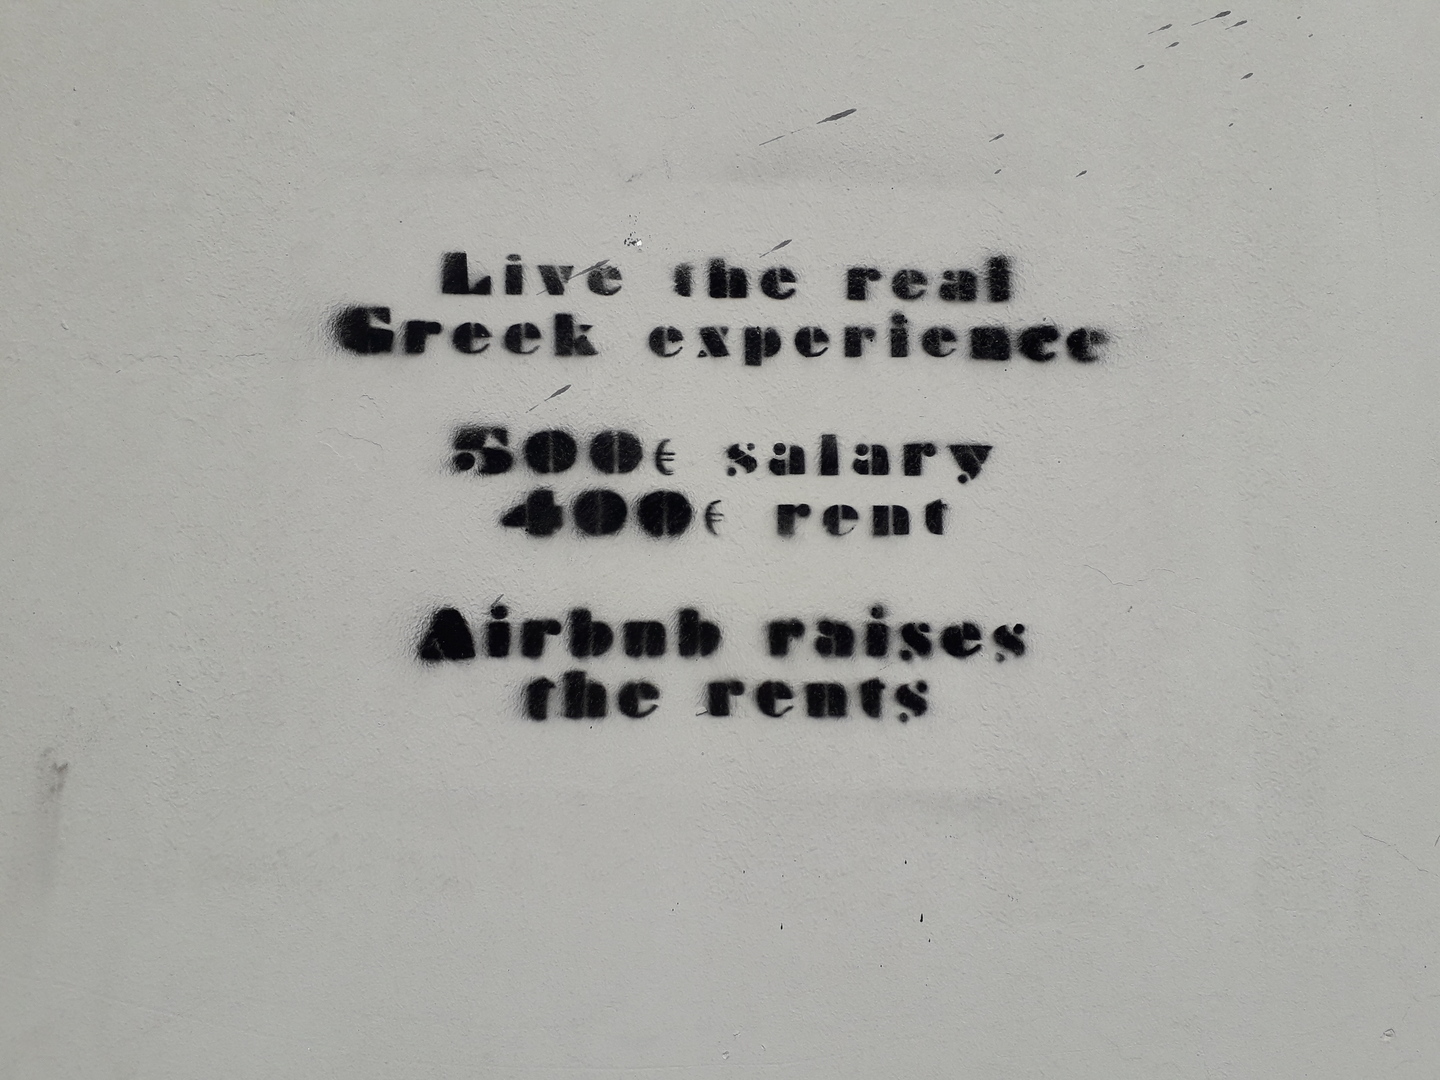 Image 8 : Tag avec l'inscription Live the real Greek experience 500€ salary 400€ rent Airbnb raises the rents